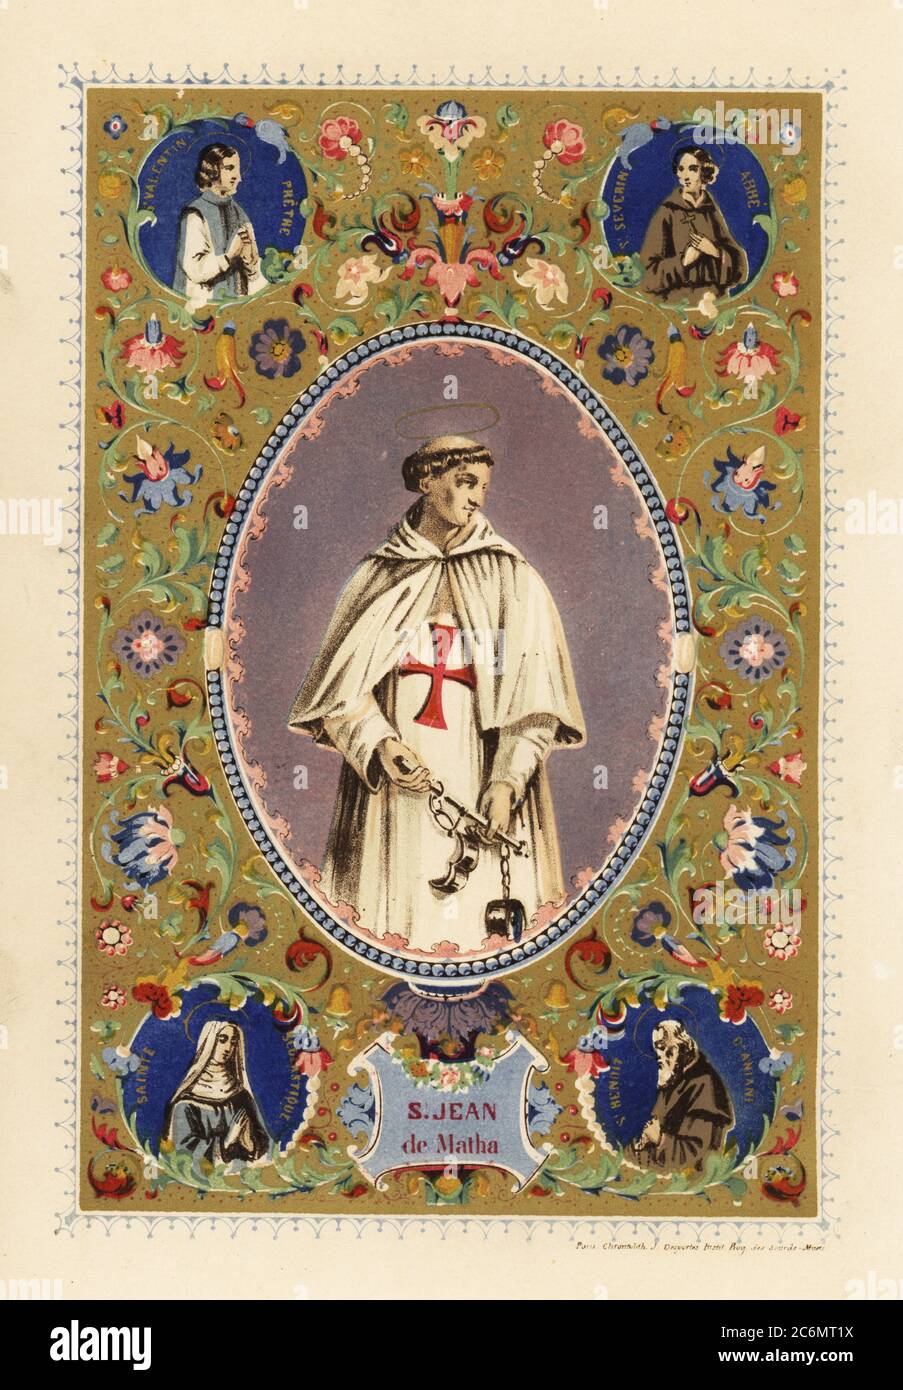 Portrait of Saint John of Matha, founder of the Order of the Most Holy Trinity, with halo, in Crusader robes, holding shackles of freed Christians. Vignettes of Saint Valentine, priest in the Roman Empire, Saint Severin, Abbot of Saint-Maurice (Agaune), Saint Benedict of Aniane, and Saint Scholastica. Chromolithograph from Legende Celeste, nouvelle histoire de la Vie des Saints, Celestial Legend, Lives of the Saints, Paul Mellier, Paris, 1845. Chromolithograph by Jules Desportes, professor of lithography at the Institut Royal des Sourds-Muets. Stock Photo